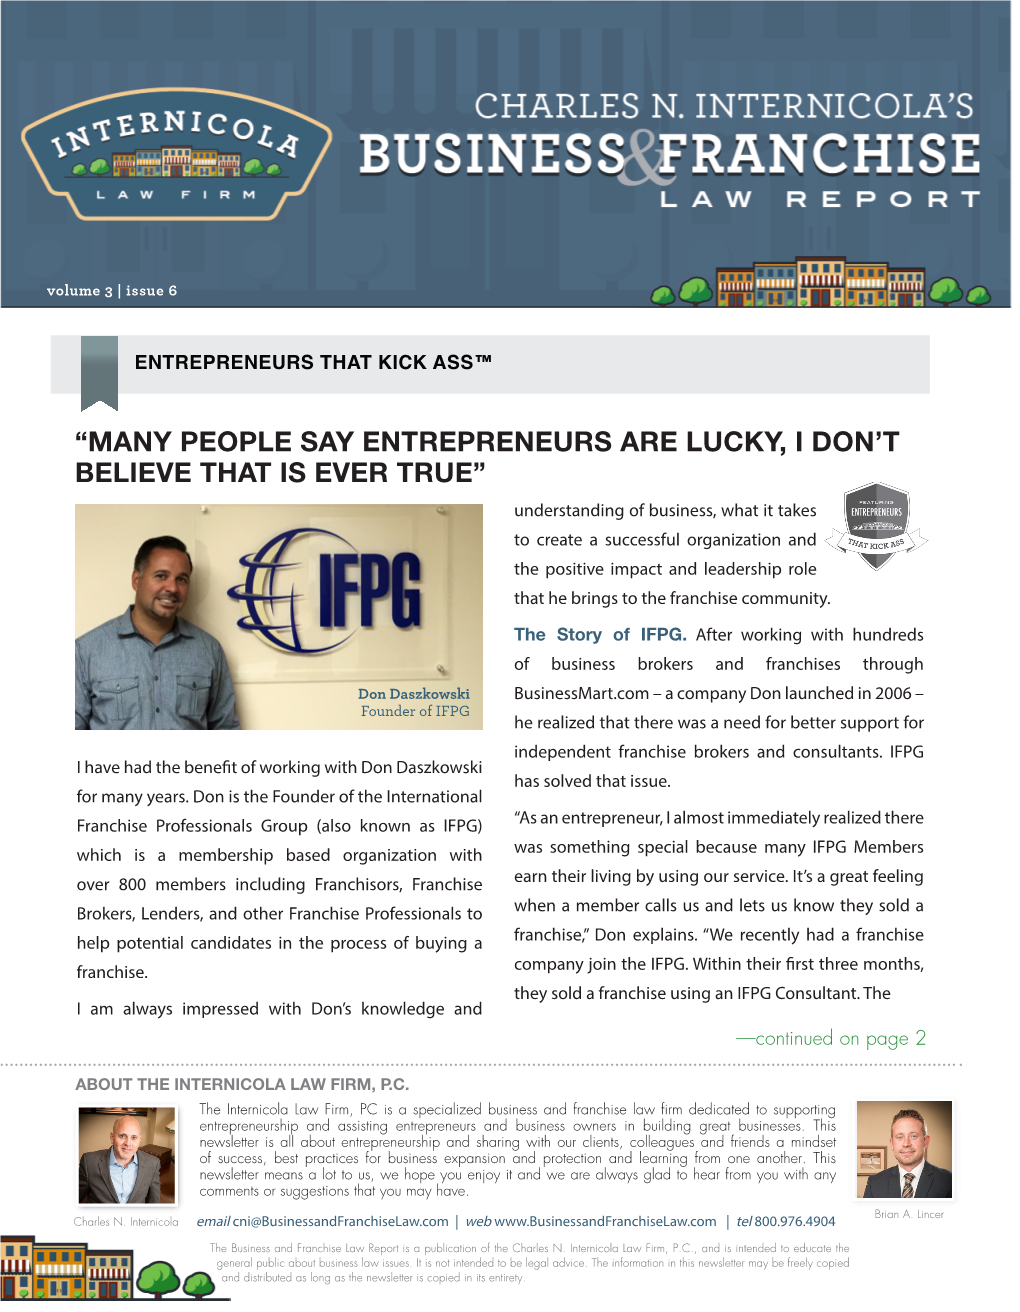 Business and Franchise Law Report Vol. 3 Issue 6